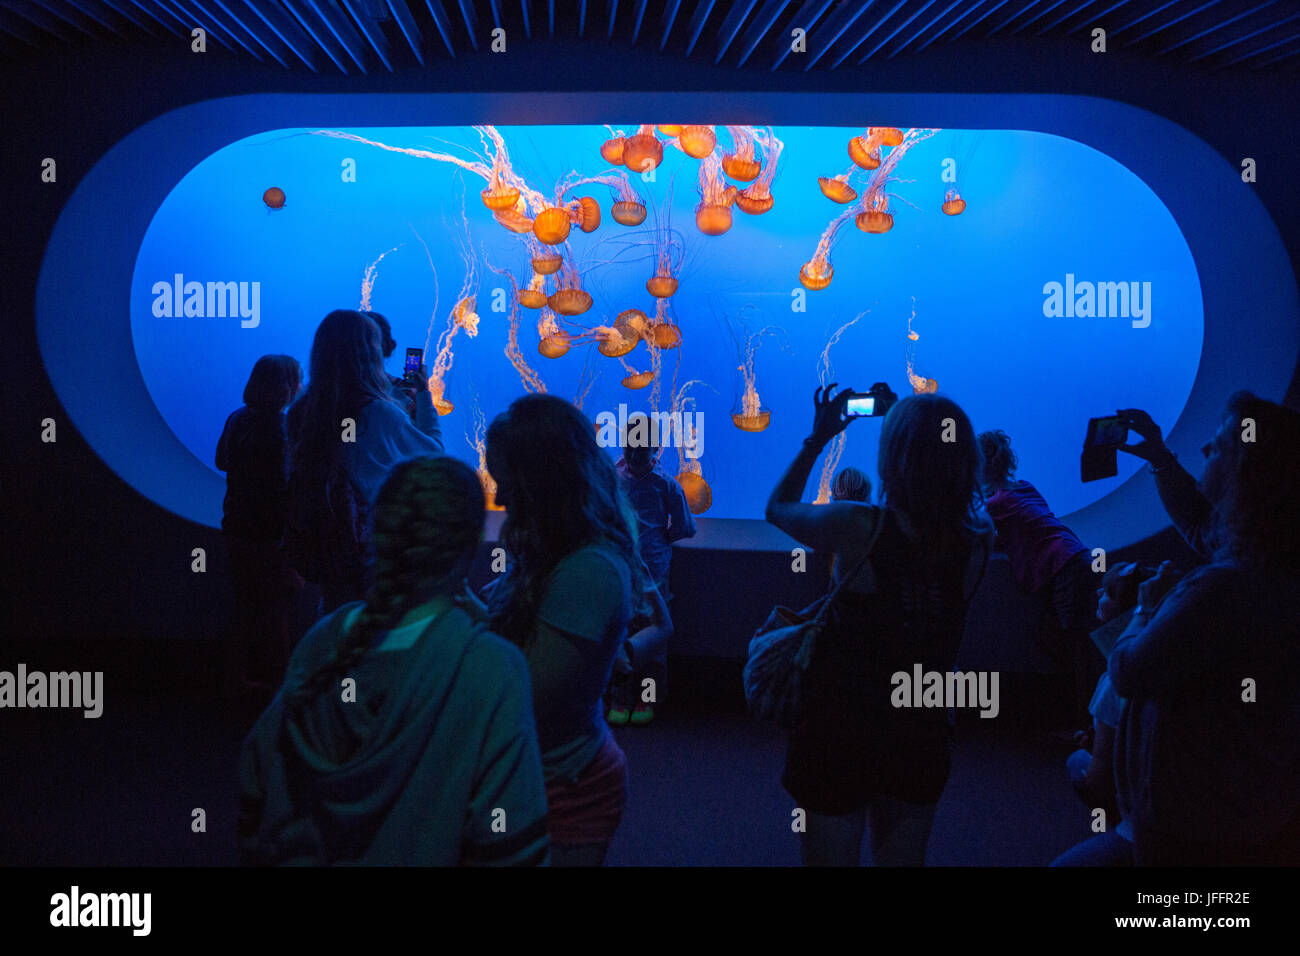 Visitors at the Monterey Bay Aquarium watch and photograph a tank of sea nettle jellyfish. Stock Photo